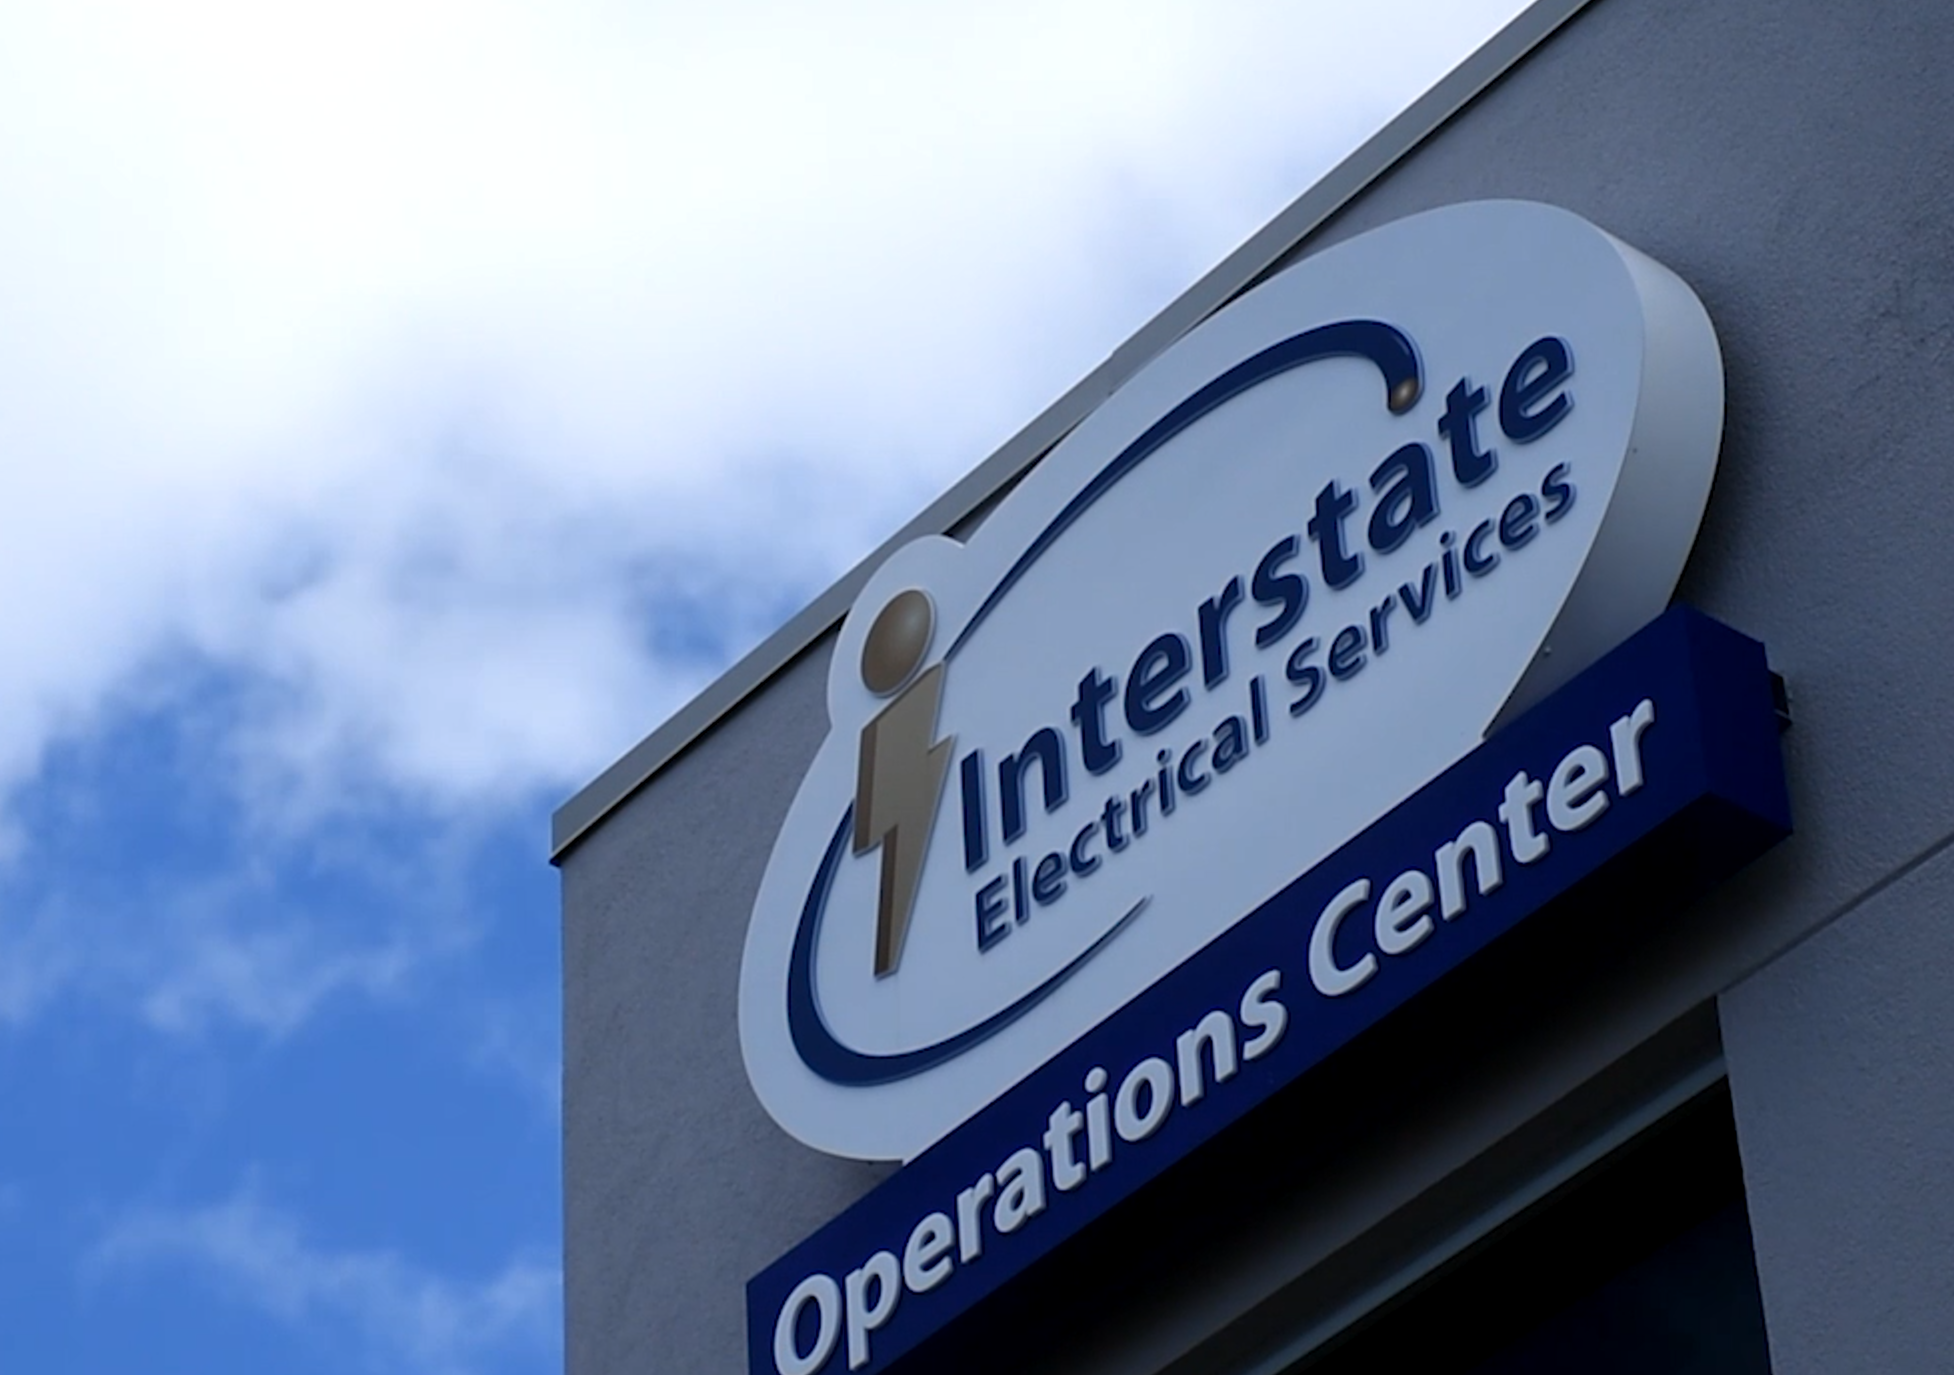 Interstate Electrical Services Corporation, Wednesday, January 22, 2020, Press release picture